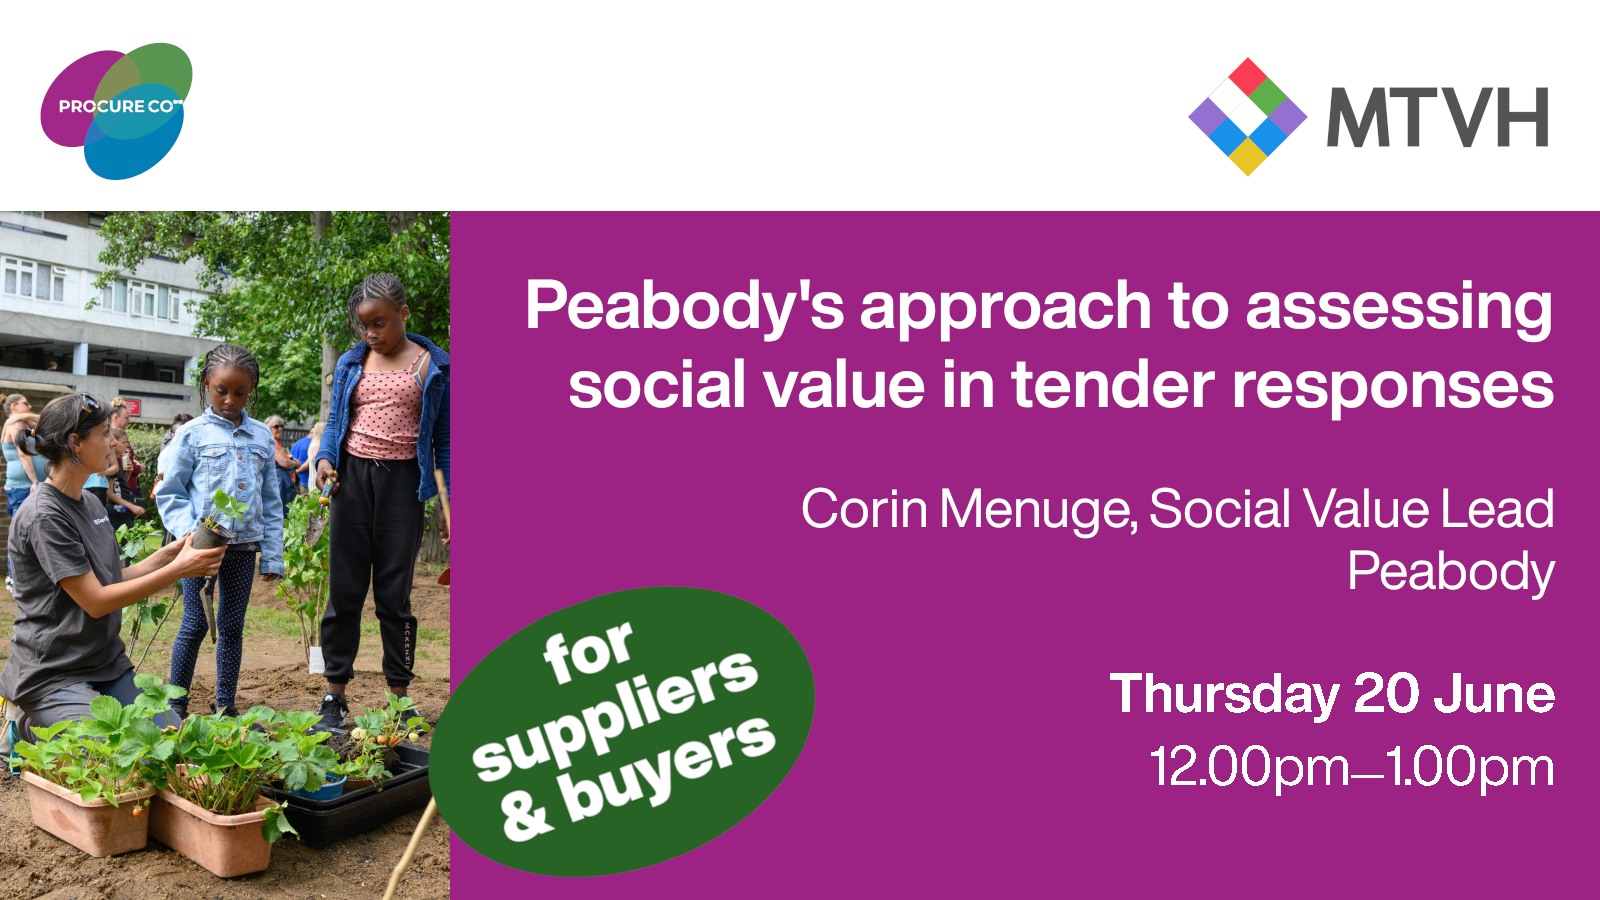 Corin Menuge on 'Peabody’s approach to assessing social value in tender responses'